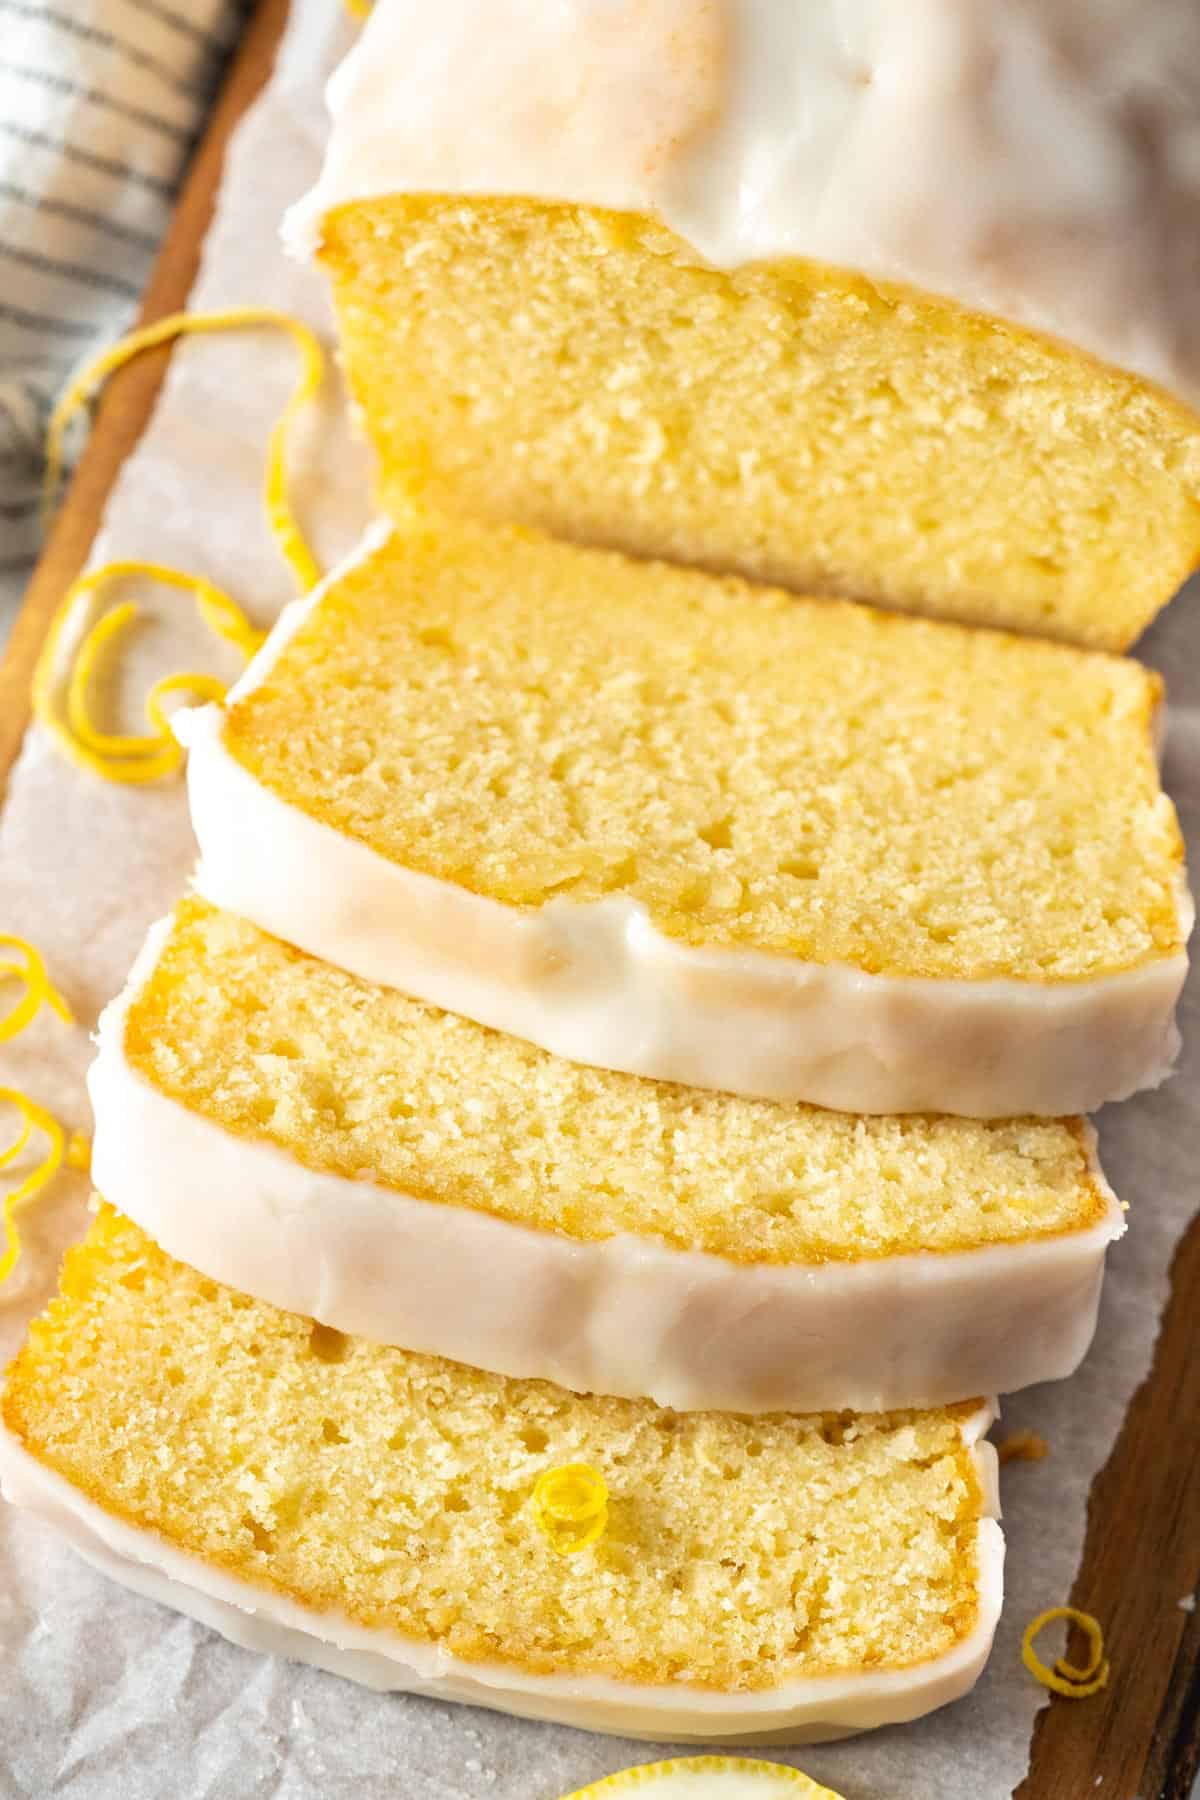 Slices of lemon loaf cake on a wooden cutting board.